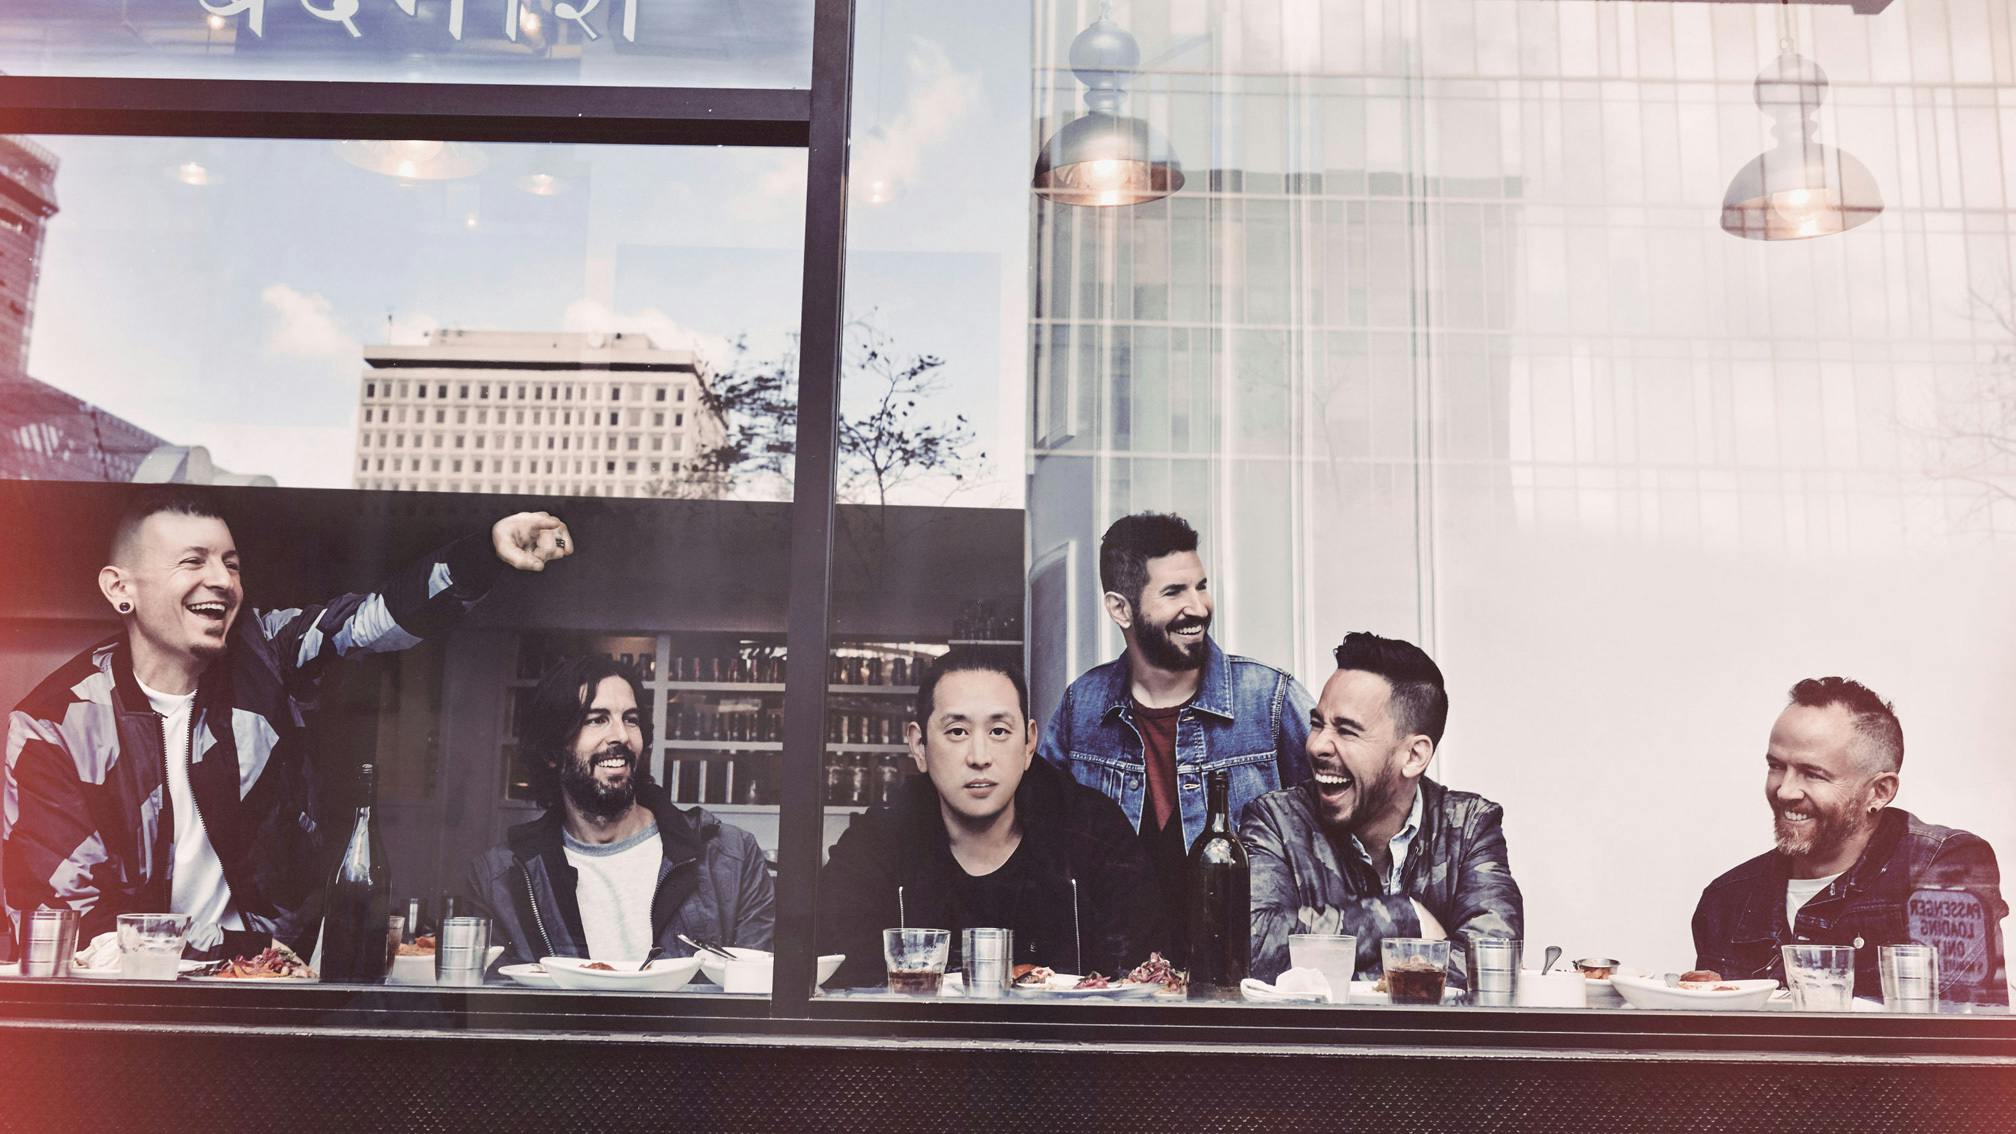 10 lesser known Linkin Park songs that everyone needs to hear